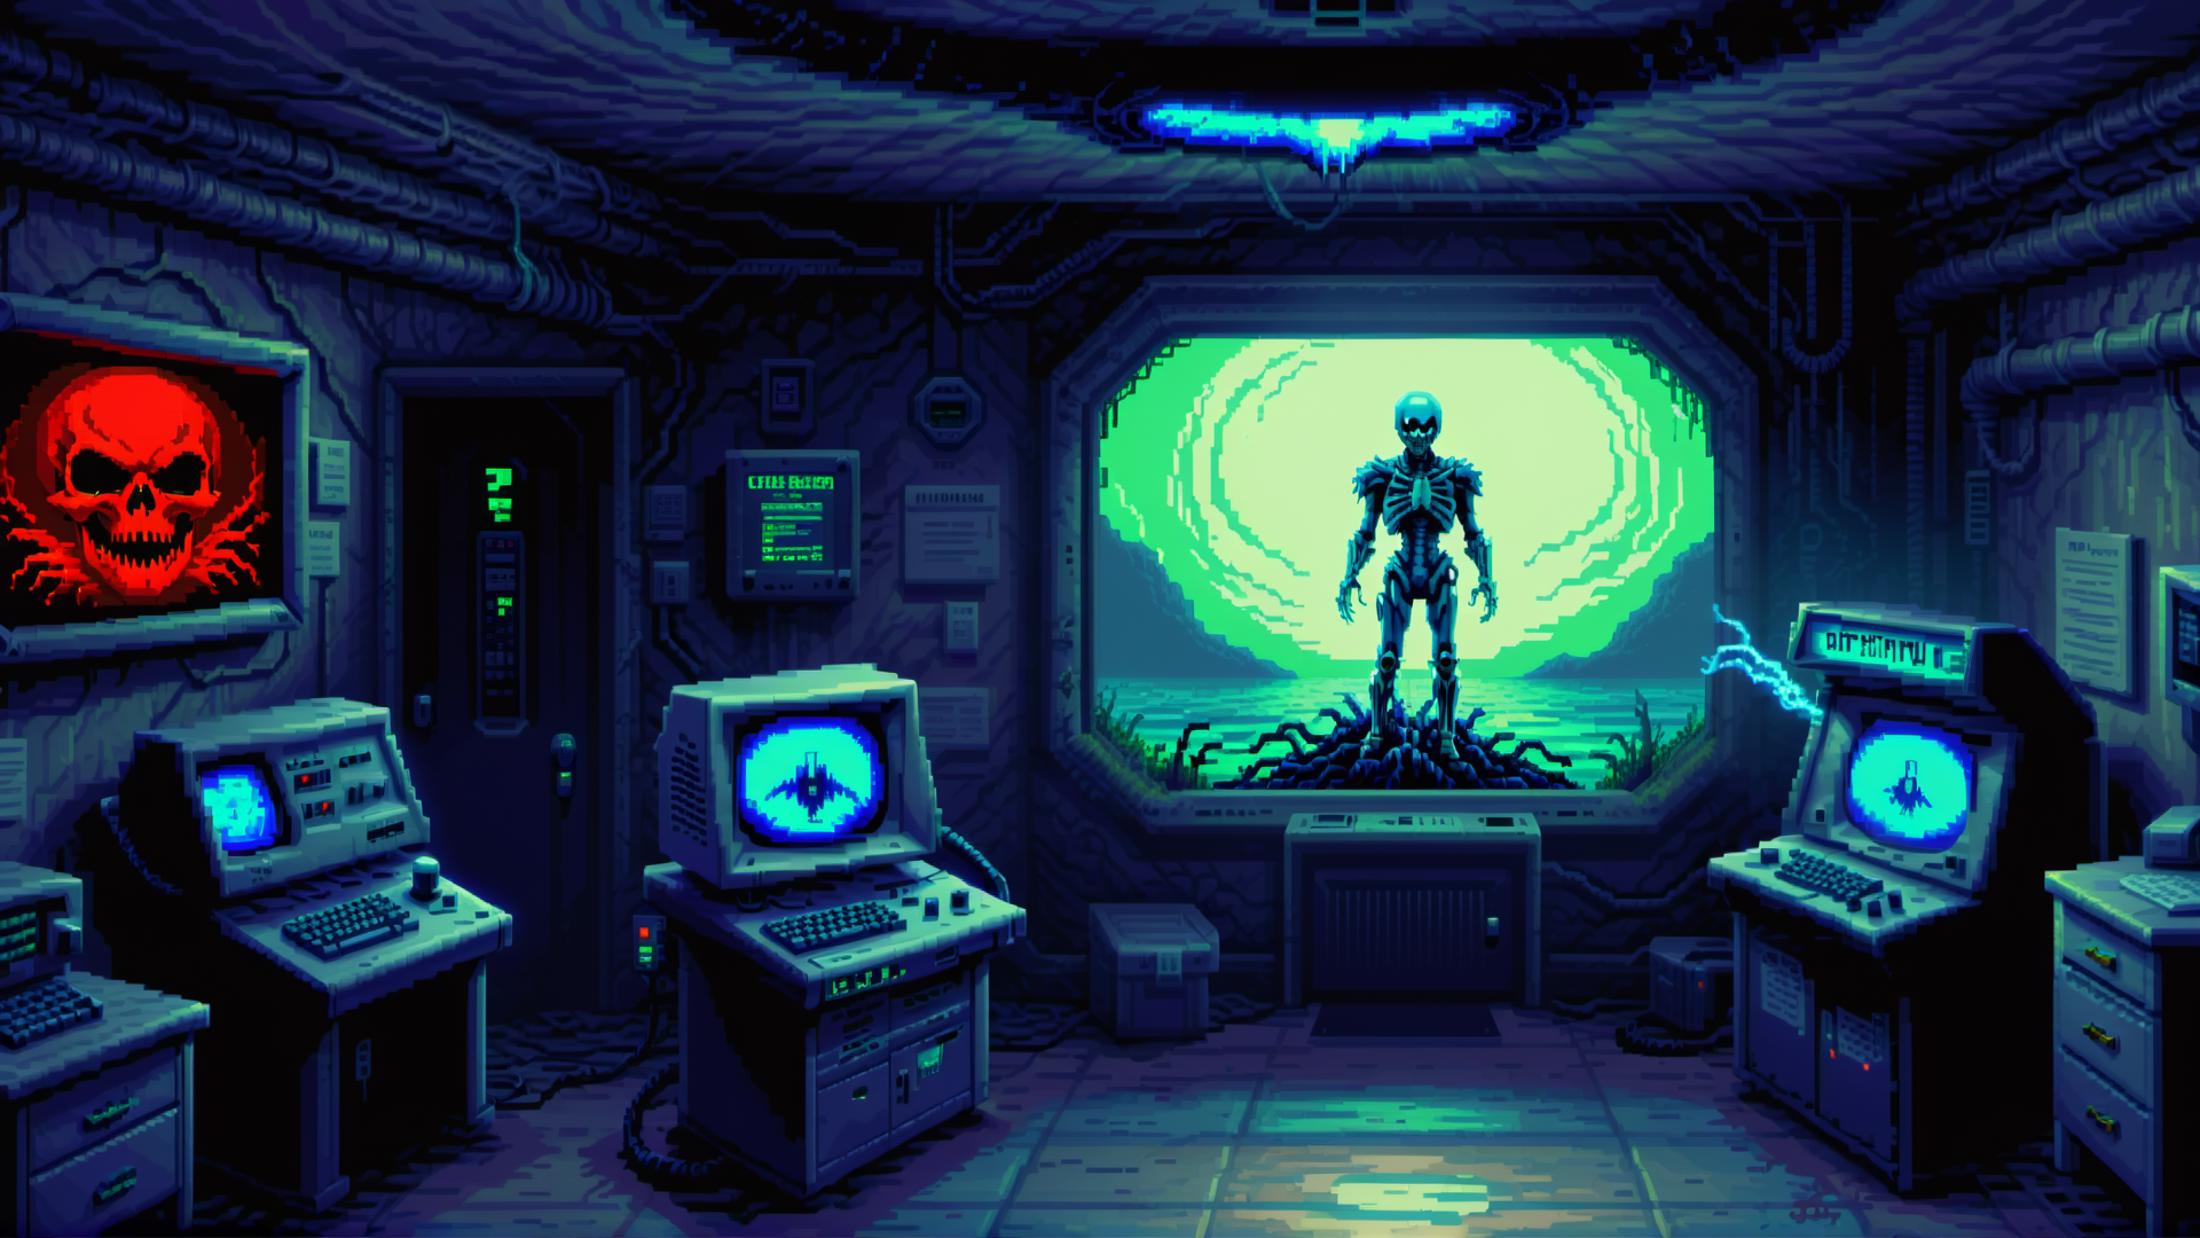 "LucasArts Style" (1990s PC Adventure Games) - SDXL LoRA - (Dreambooth Trained) image by deep_synth